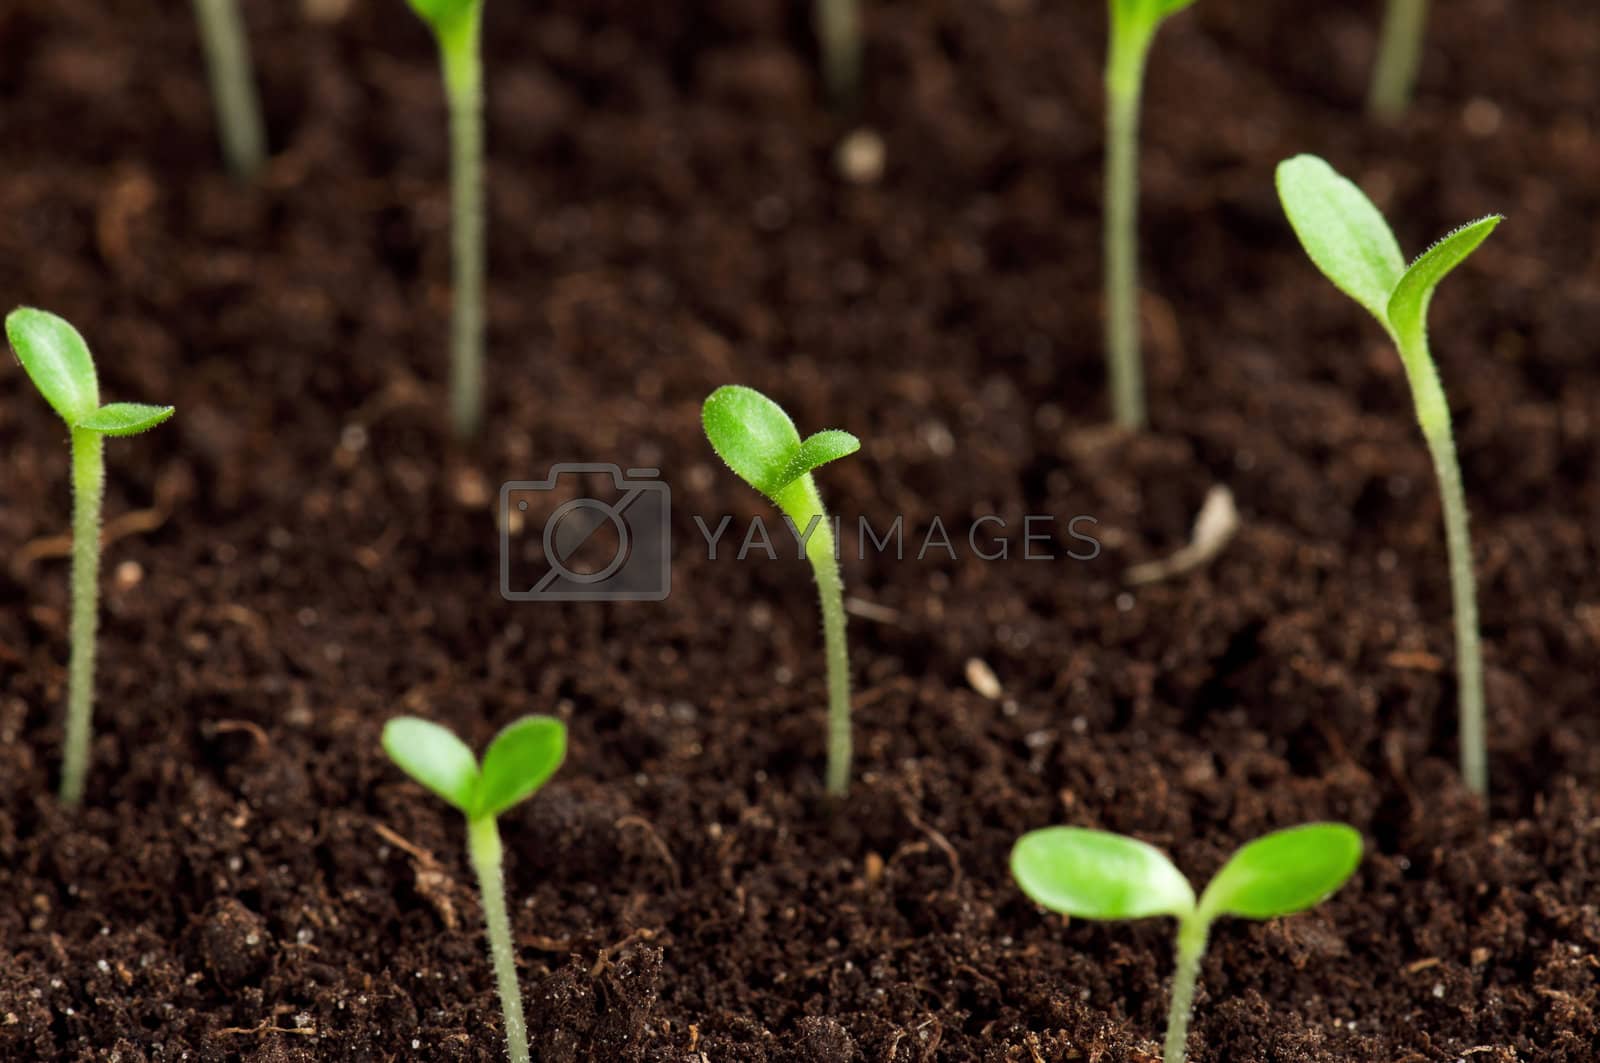 Royalty free image of Green seedling by fotostok_pdv